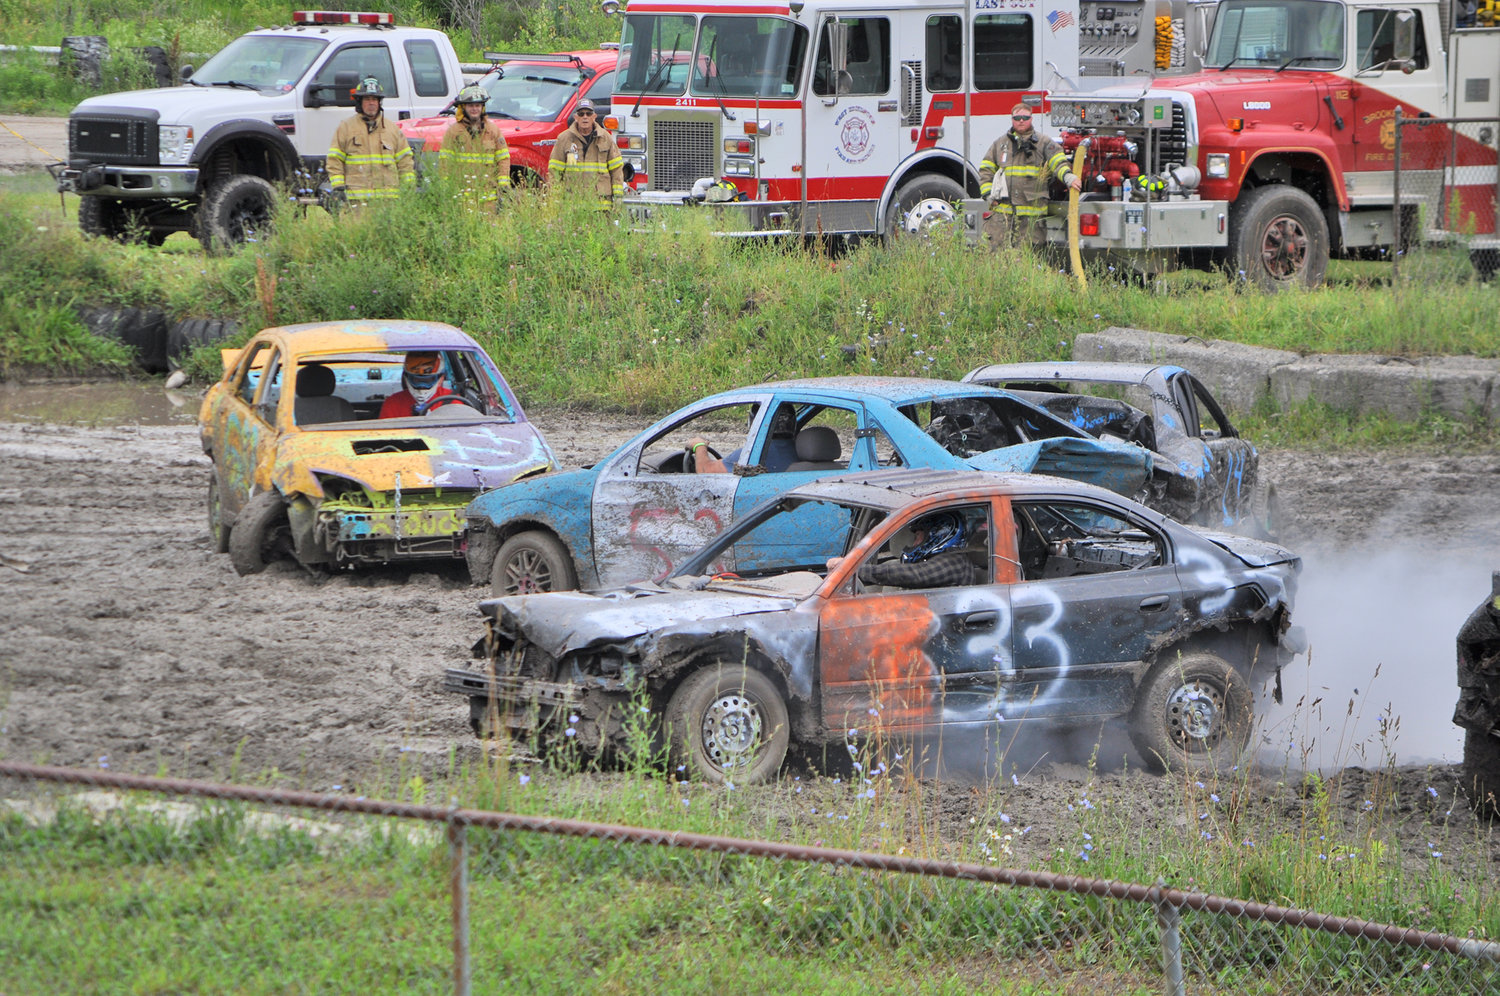 Pictured is a demolition derby as part of a past Madison County Fair.